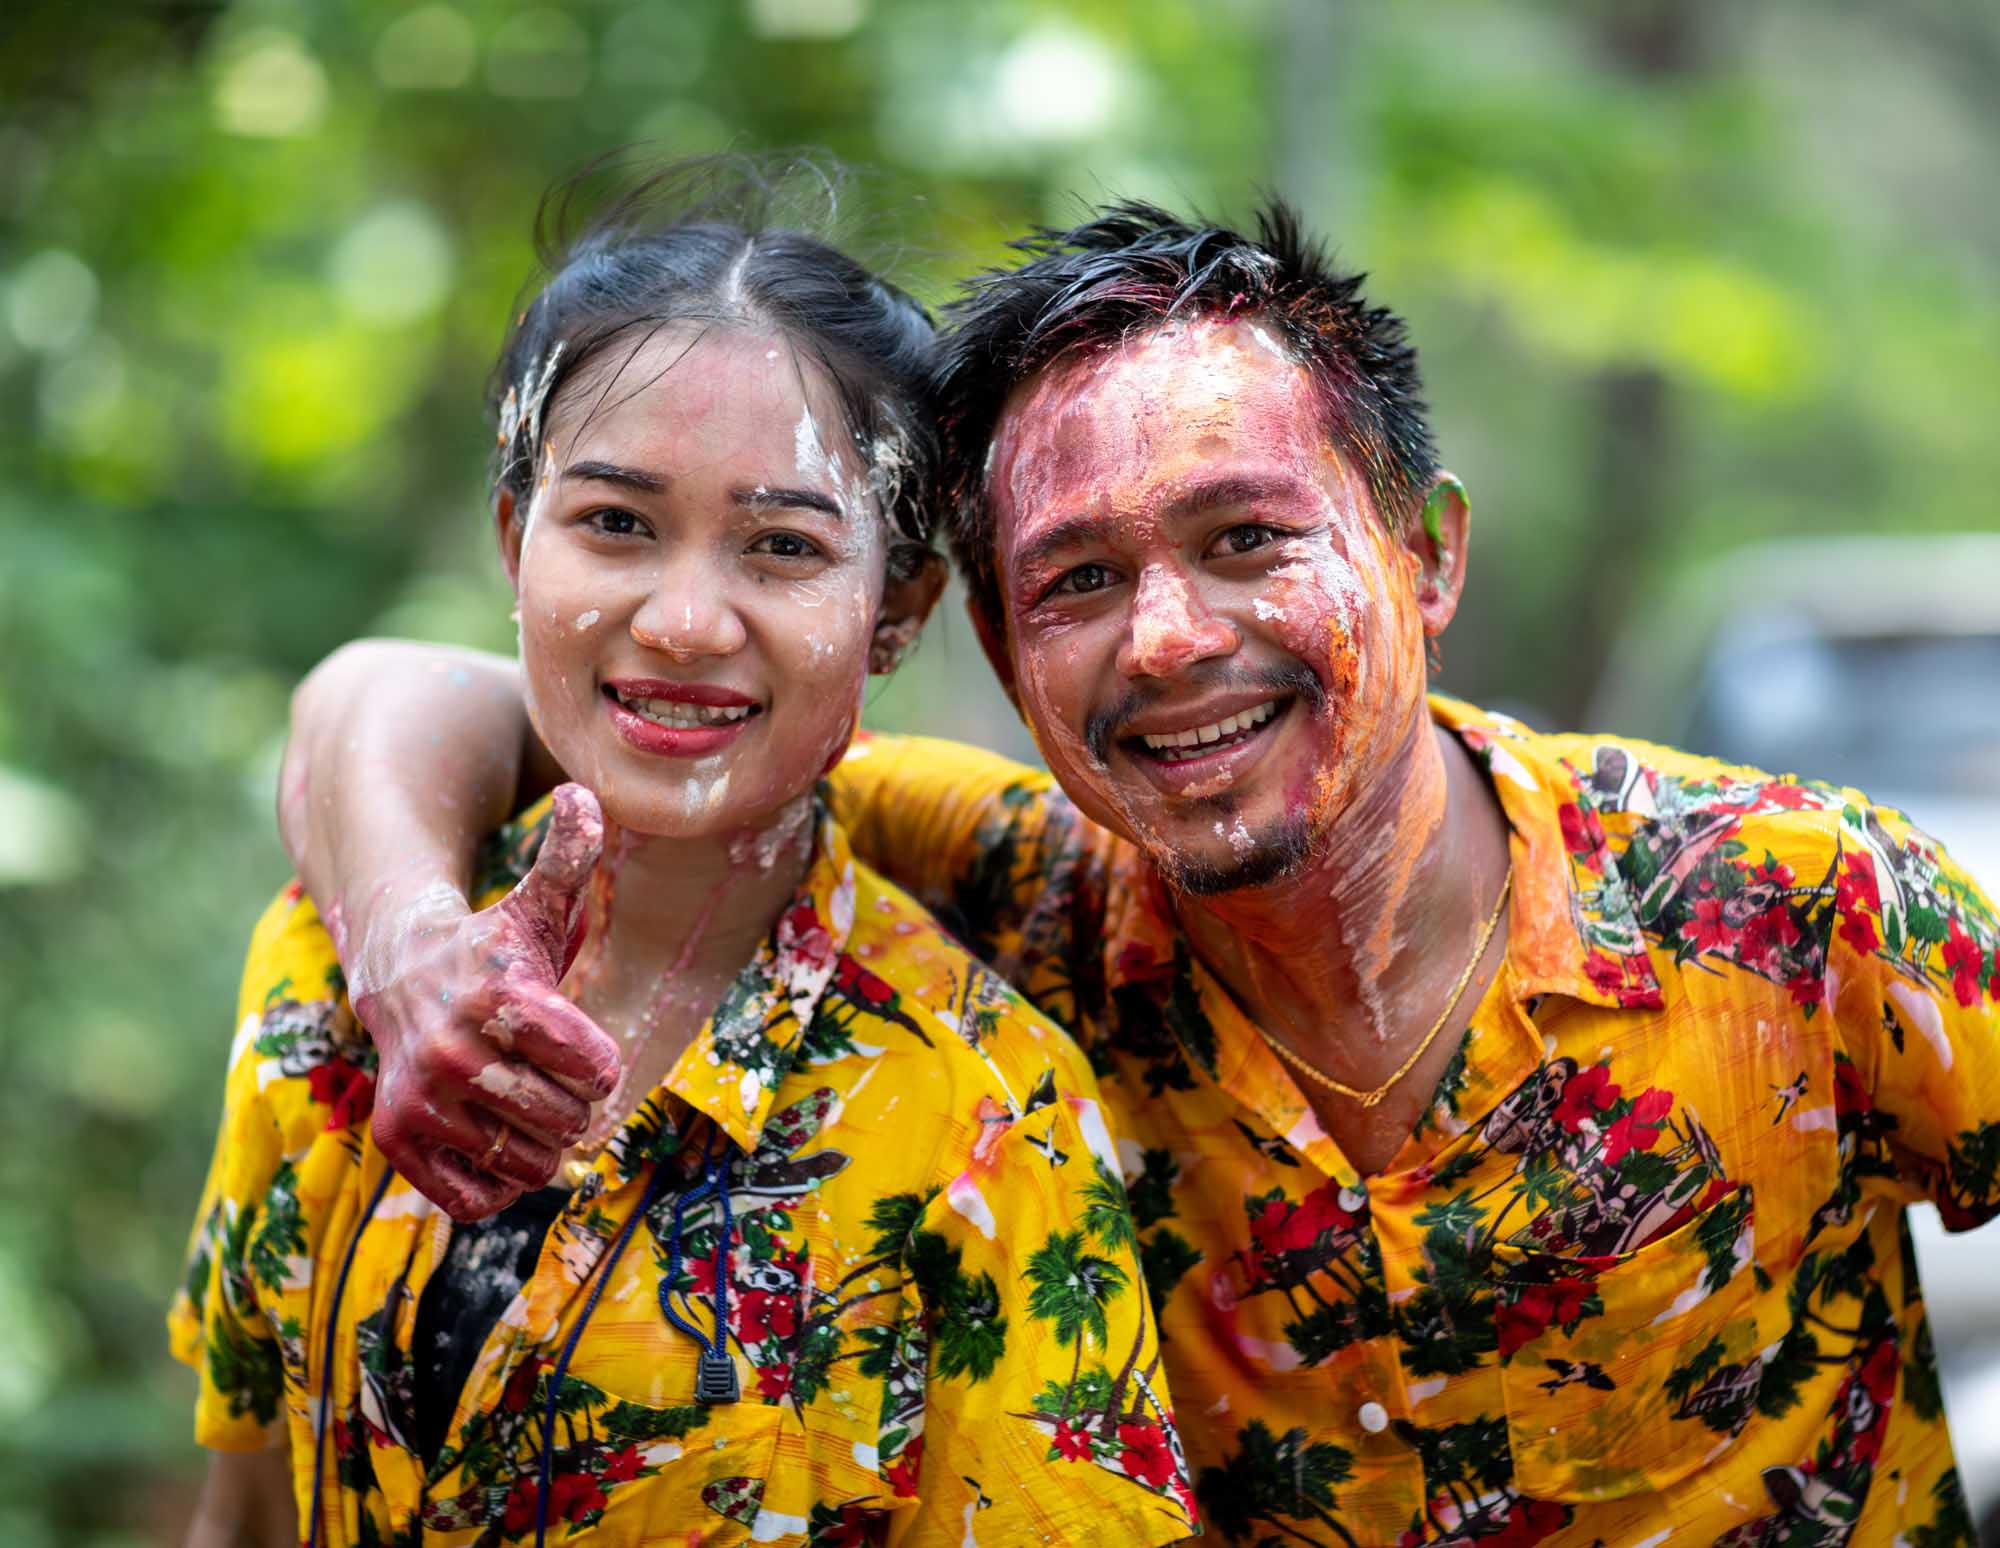 Man and woman smiling with paint on their faces at Songkran water festival in Phuket, Thailand